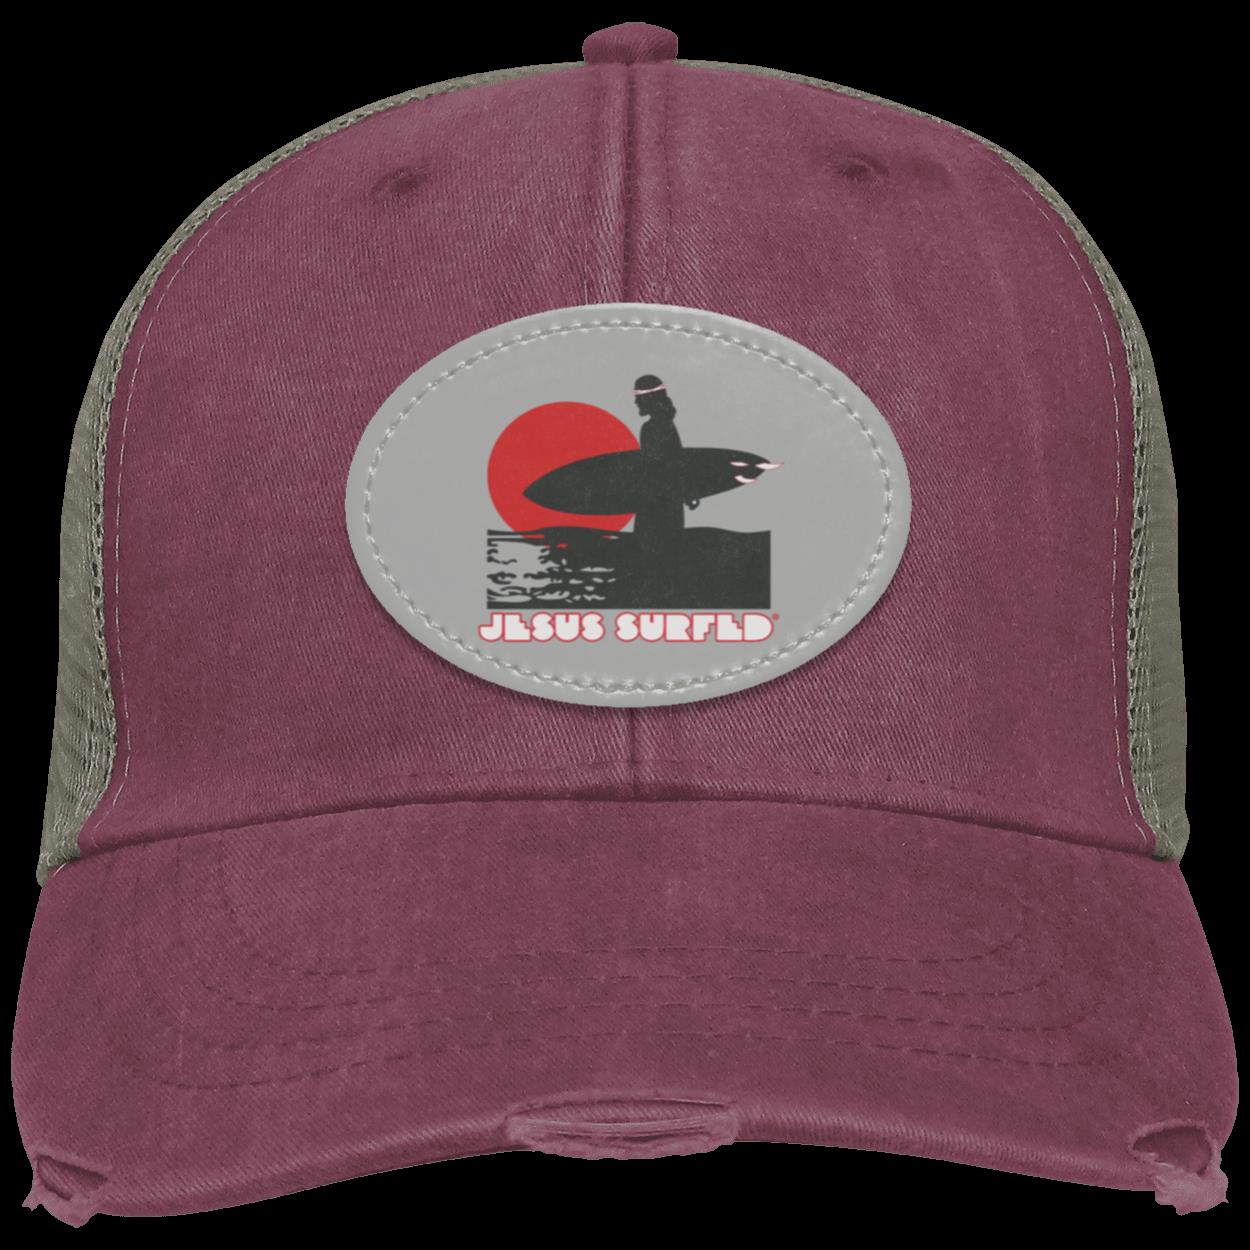 Sunset Distressed Ollie Cap - Oval Patch